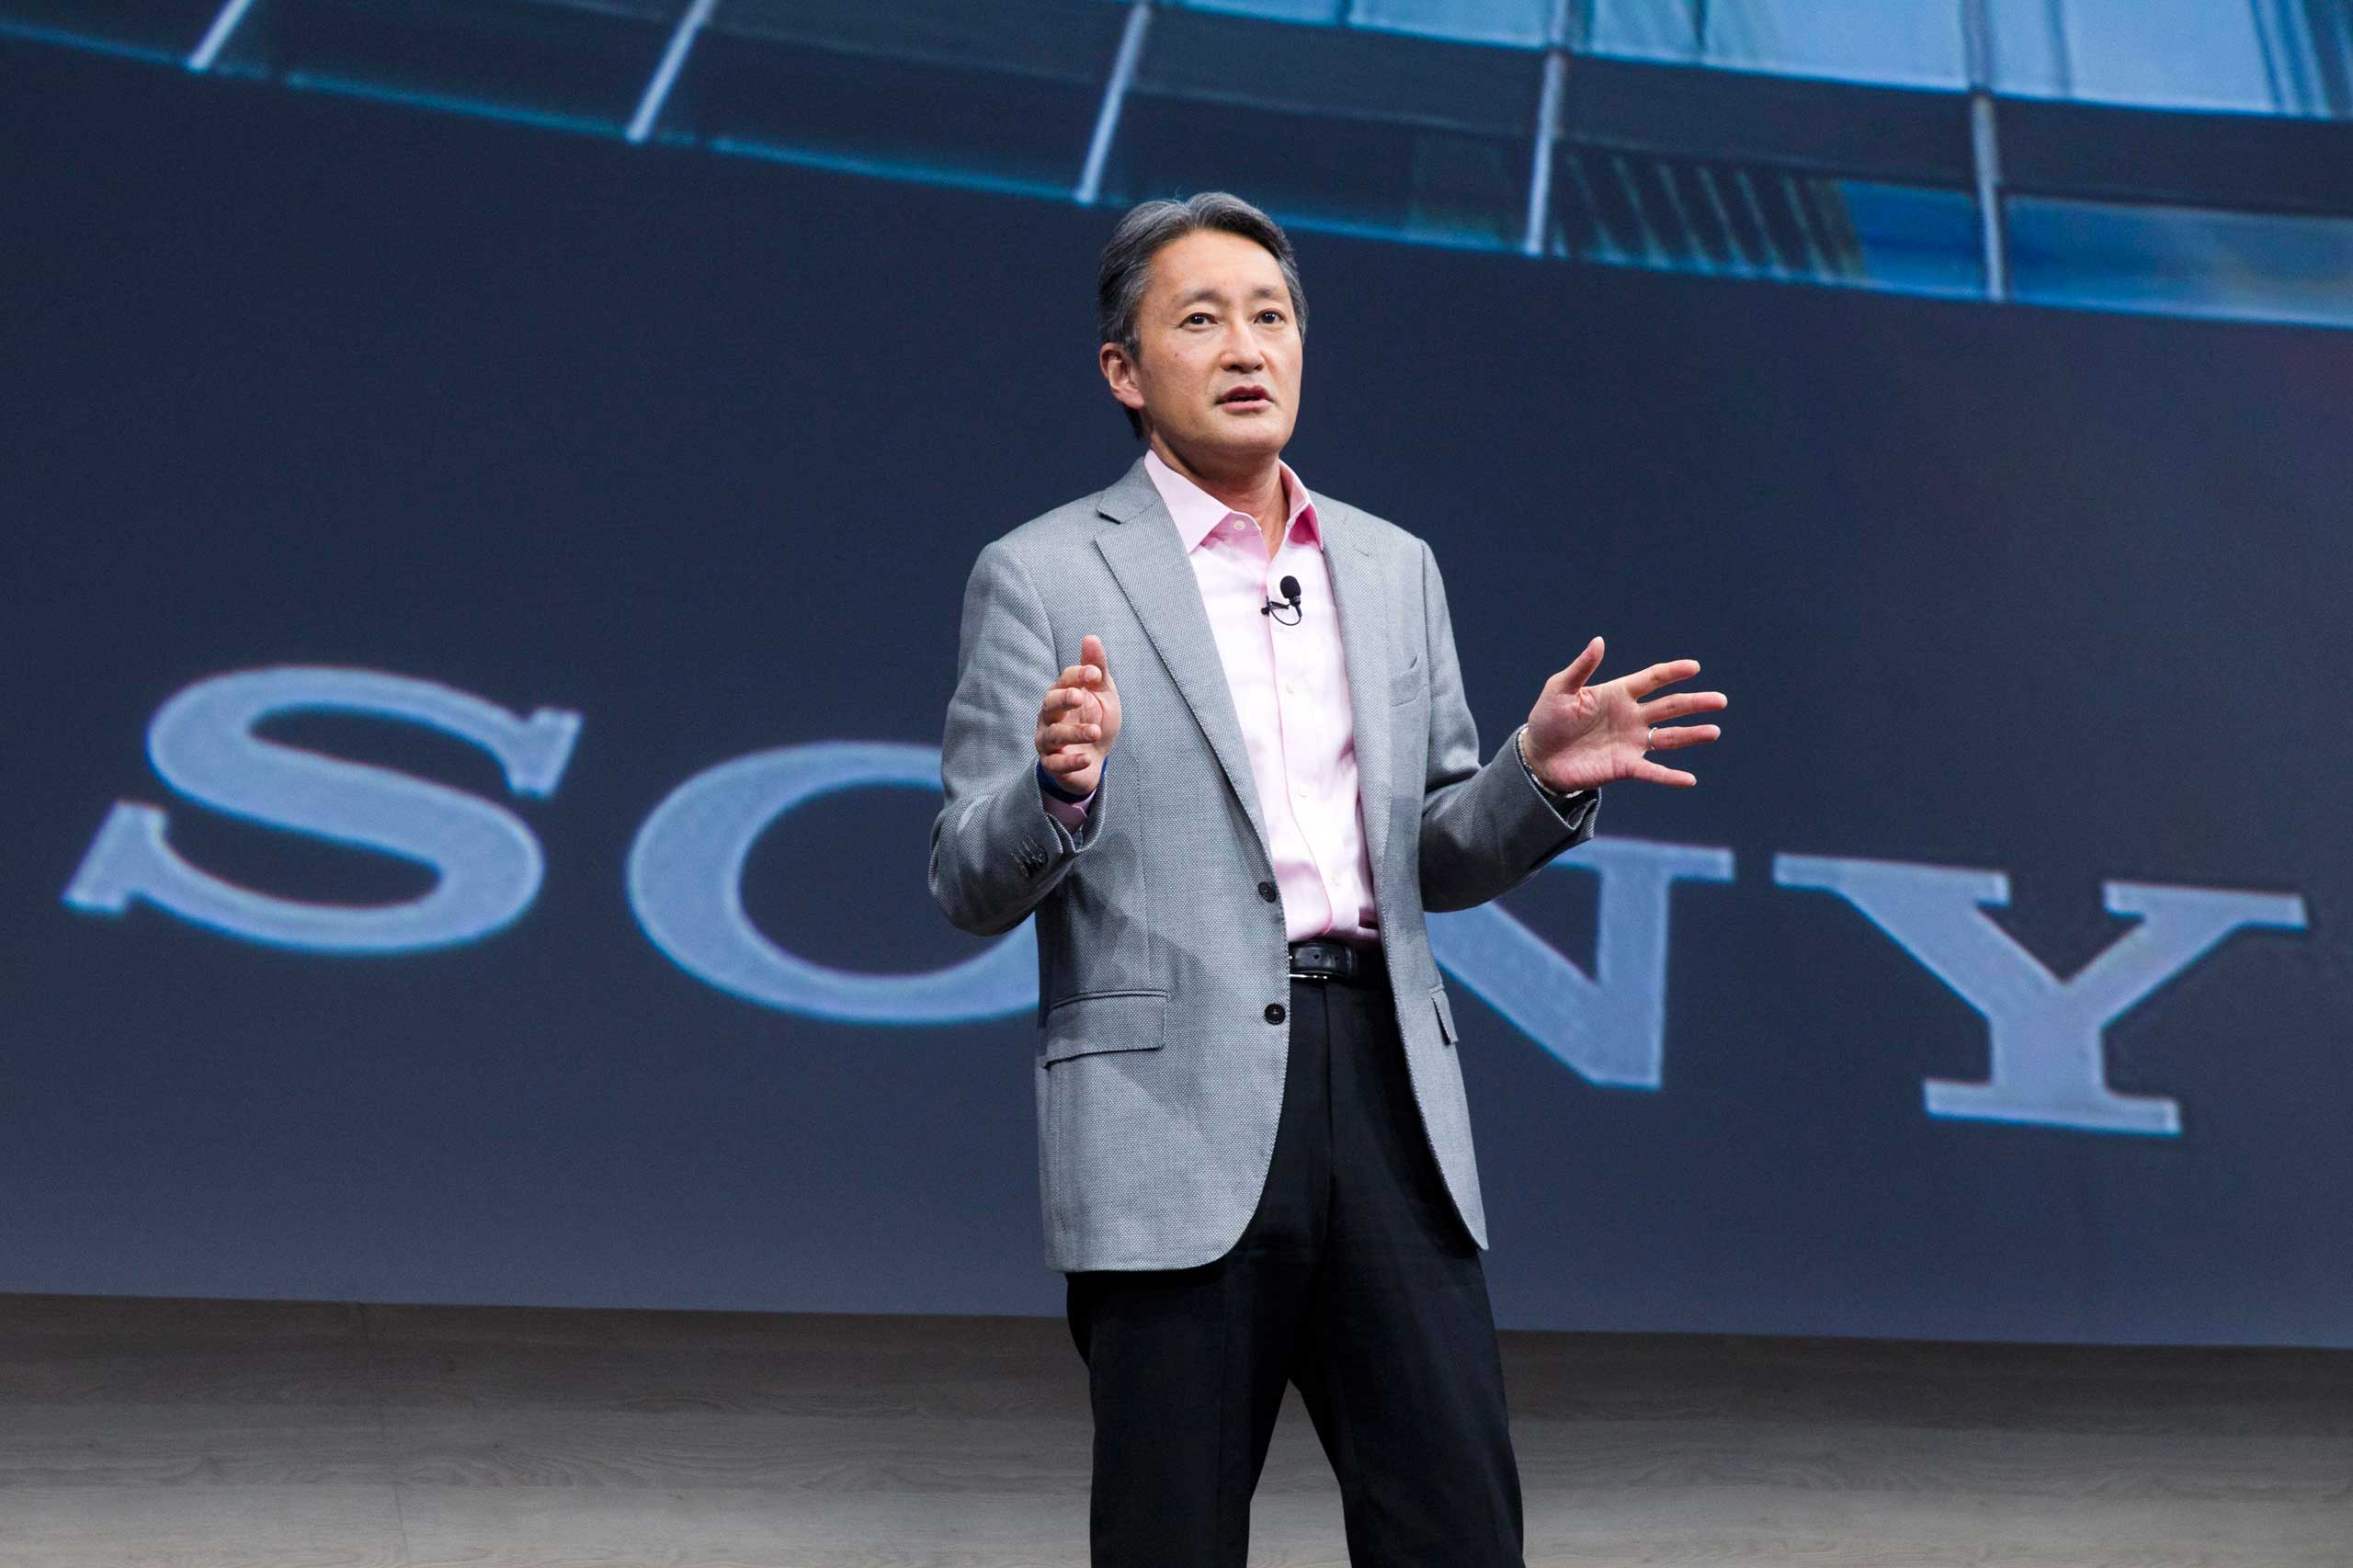 President and CEO of Sony Corporation Kazuo Hirai speaks at a Sony news conference during the 2015 International Consumer Electronics Show (CES) in Las Vegas, Jan. 5, 2015. (Steve Marcus—Reuters)